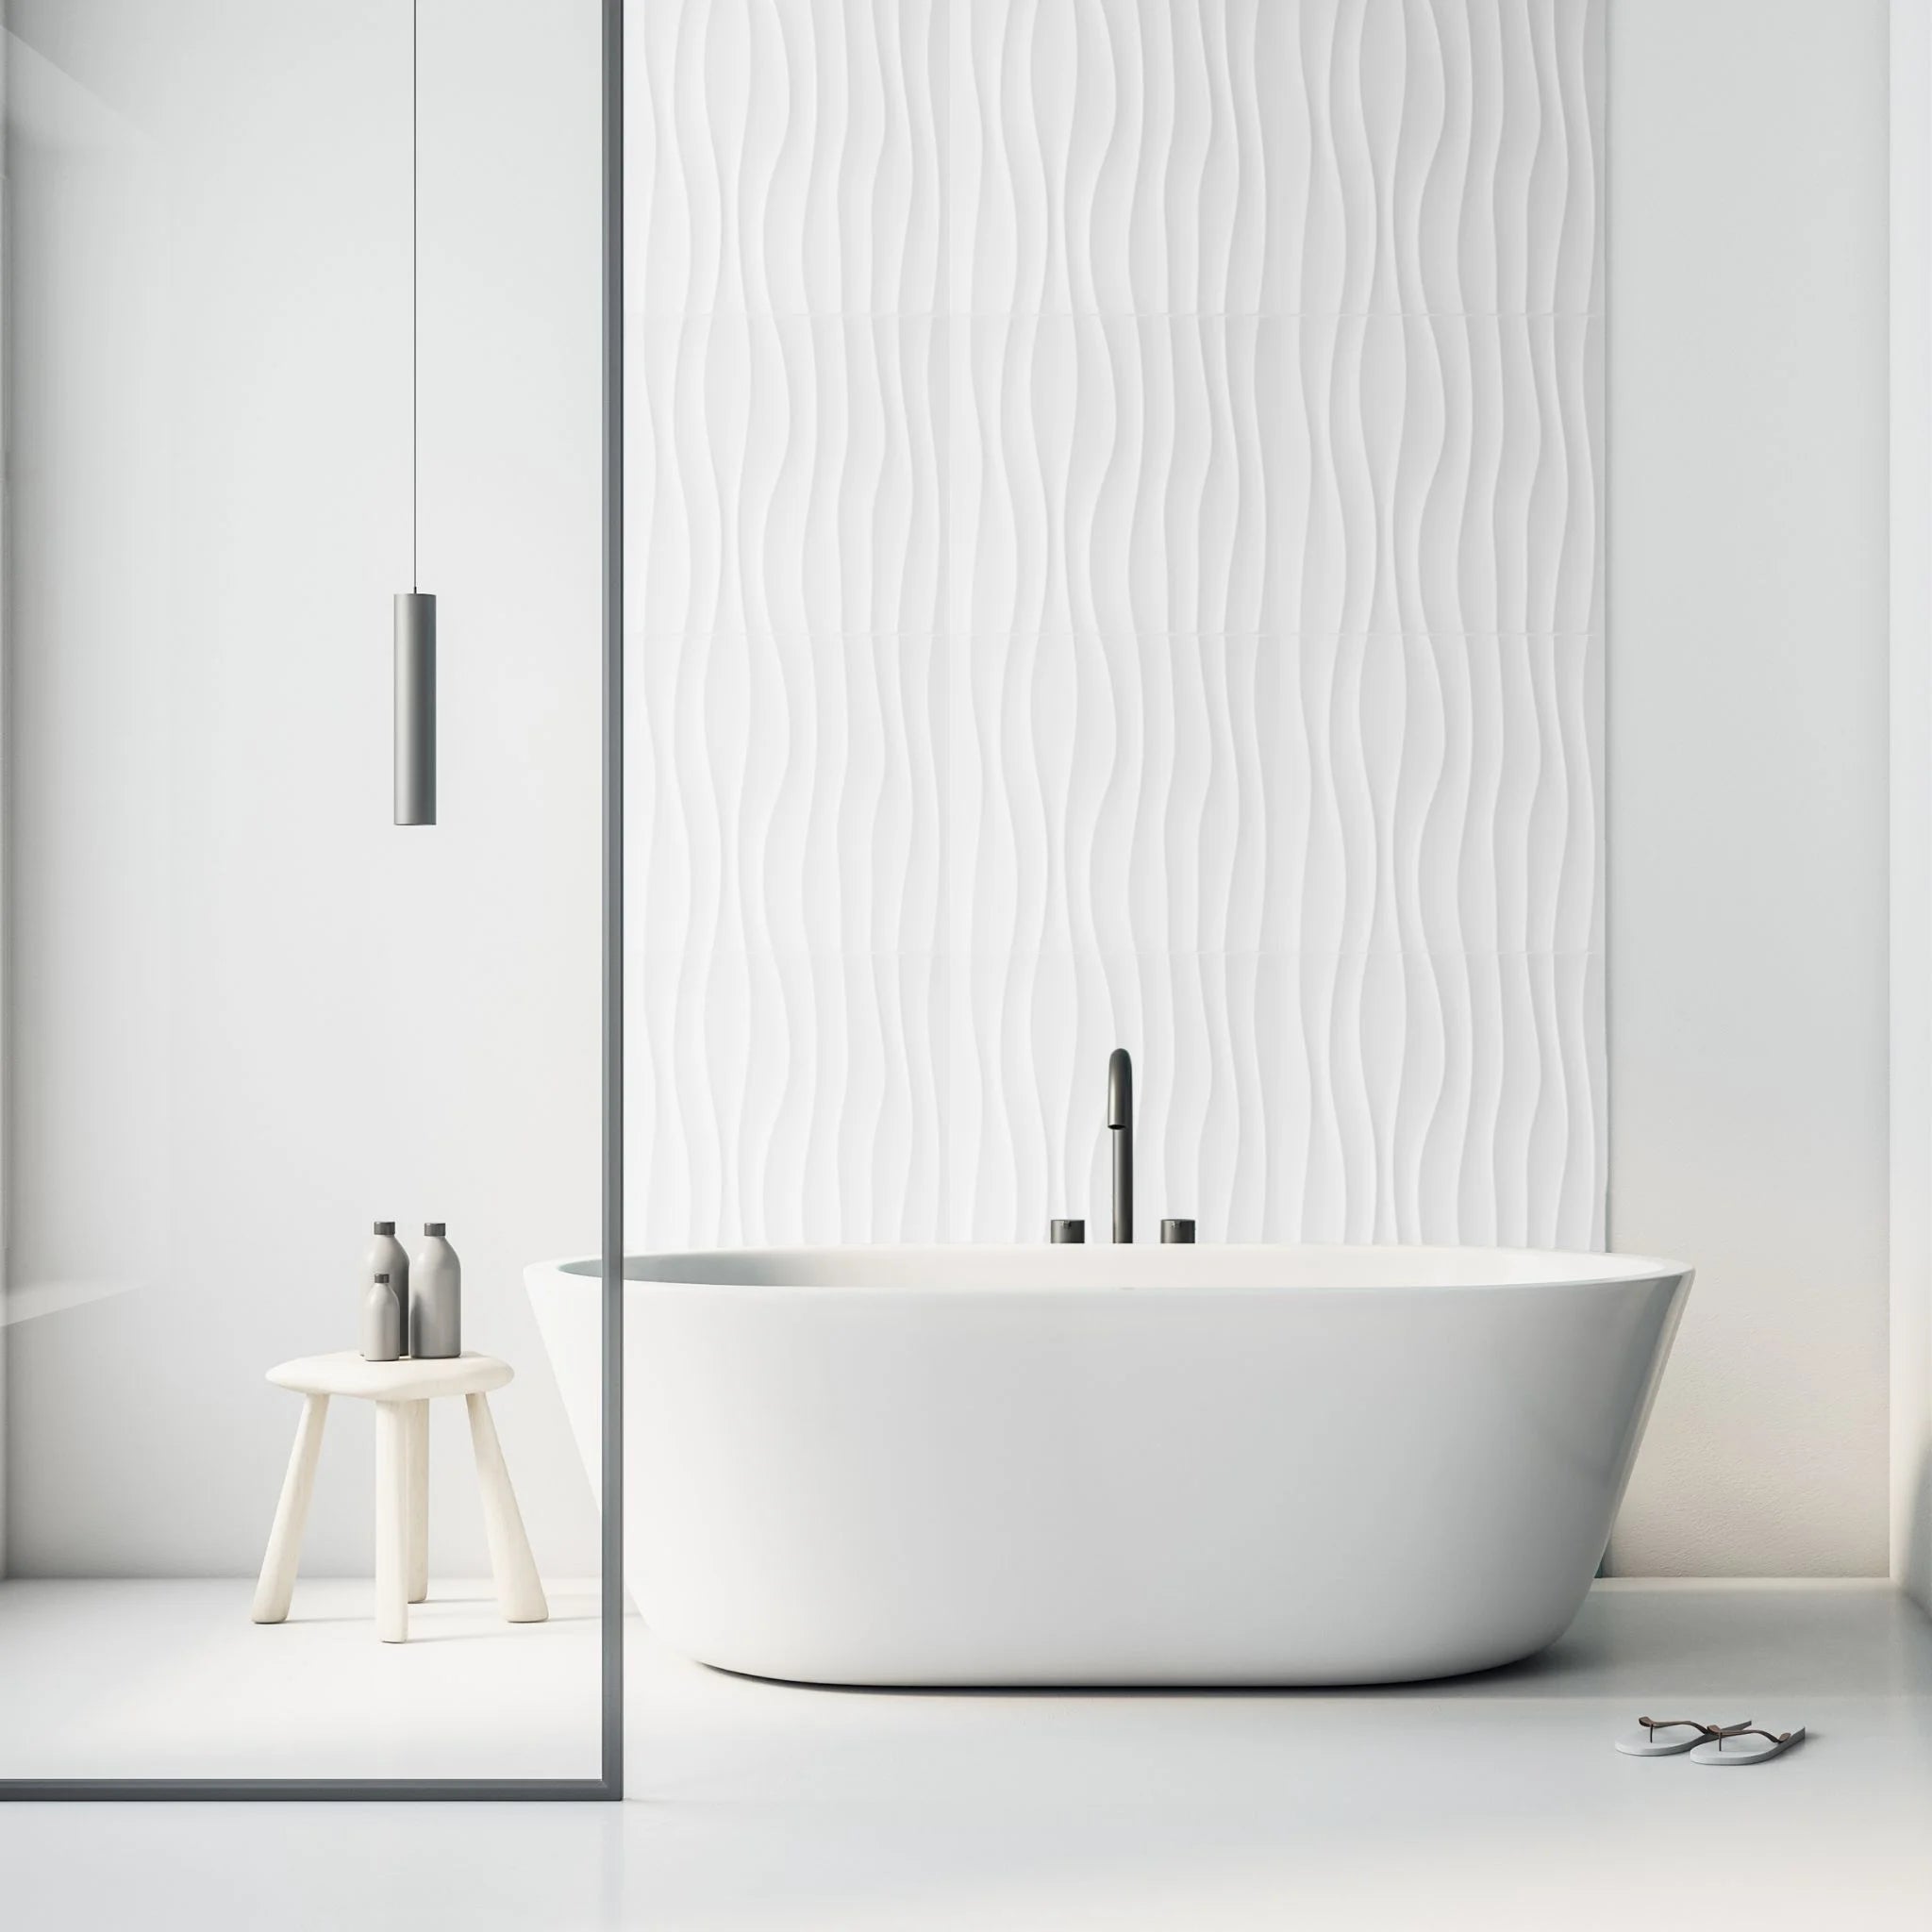 White PVC wall panel with wavy design in modern bathroom